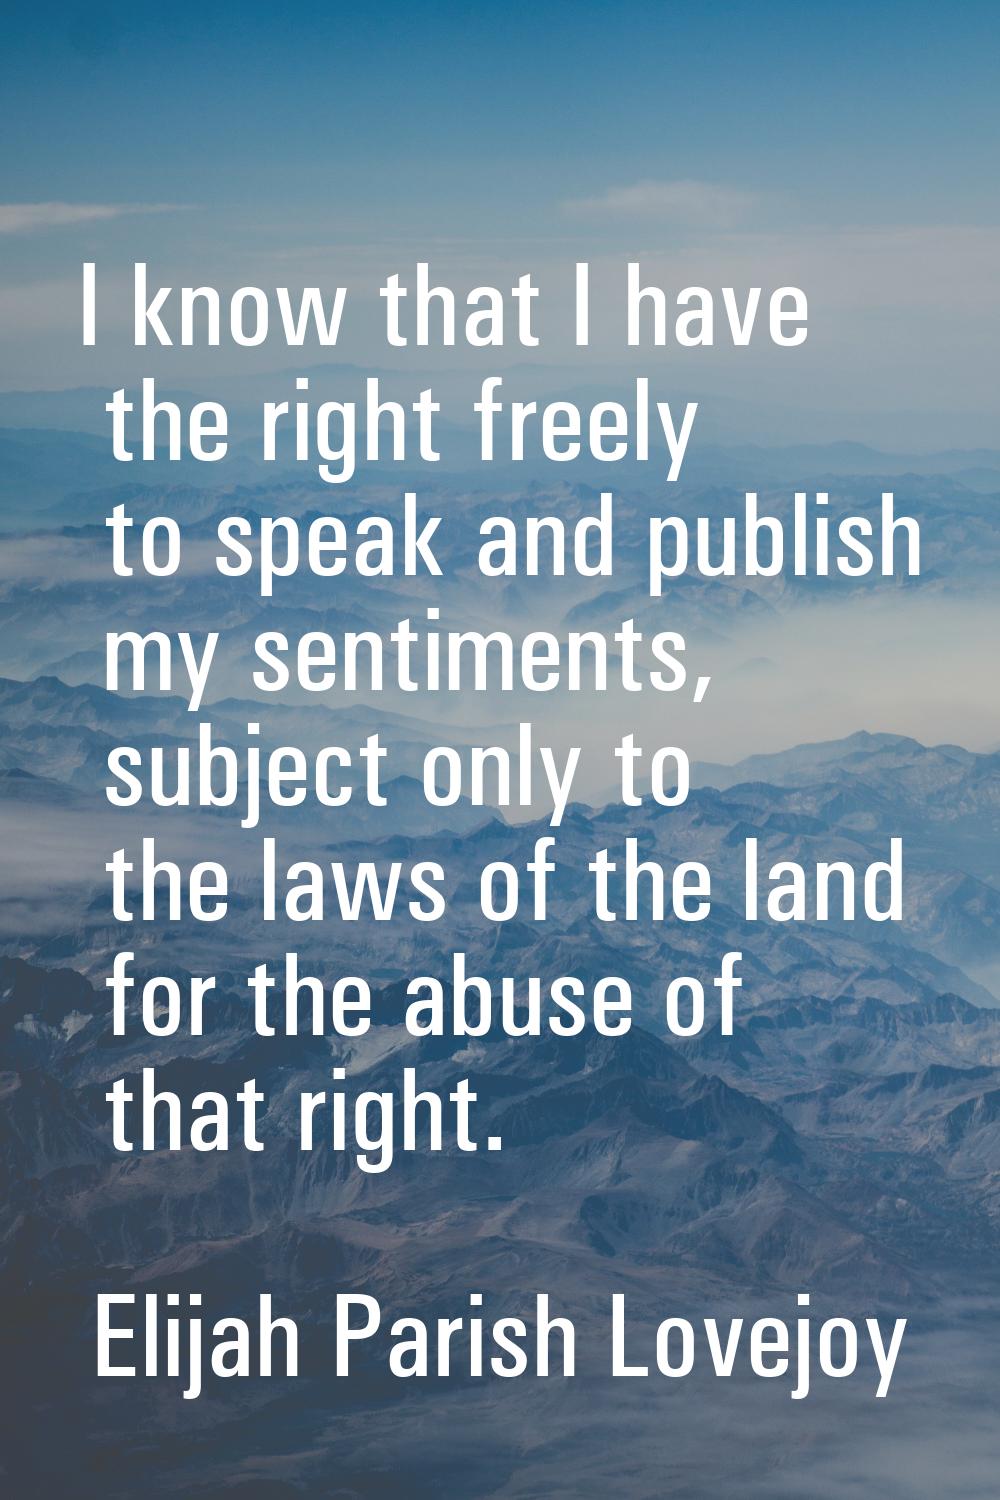 I know that I have the right freely to speak and publish my sentiments, subject only to the laws of